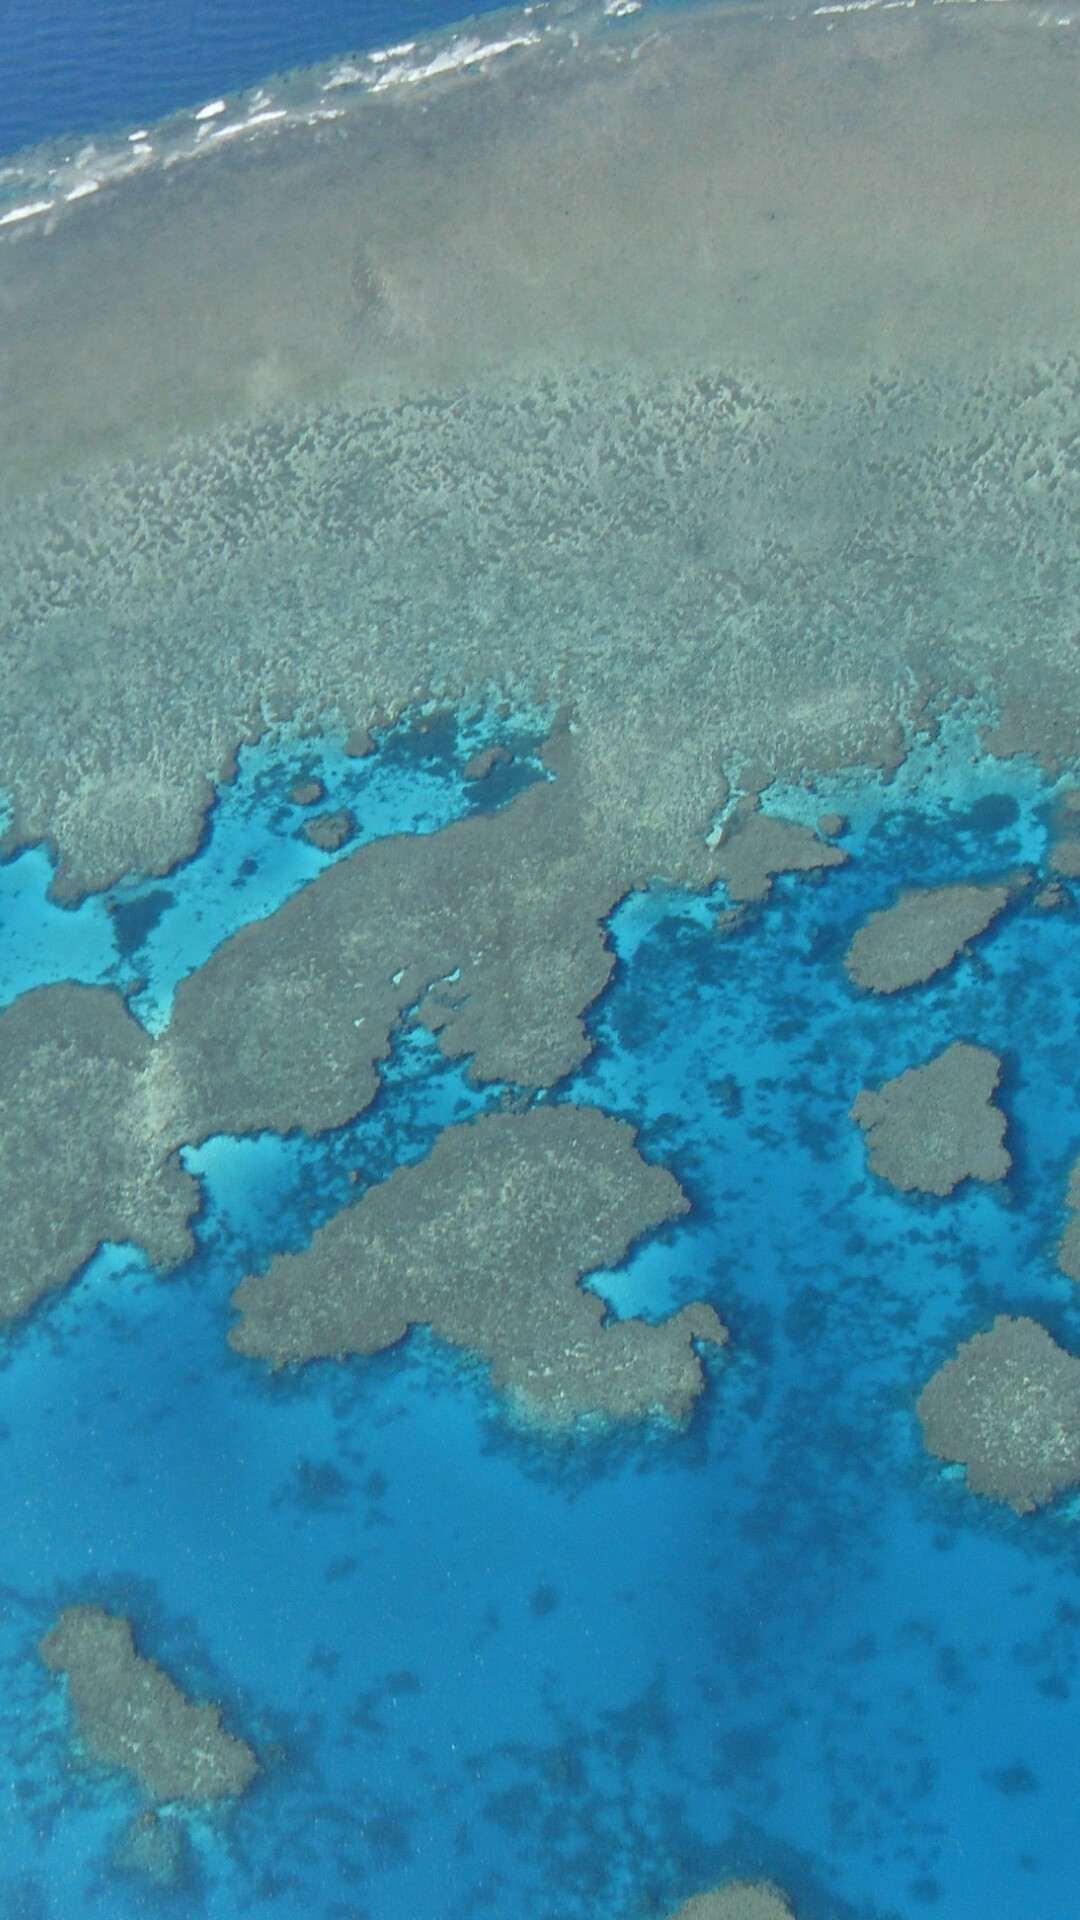 Great Barrier Reef: GBR, Stretches more than 2300 kilometers along Queensland's coastline. 1080x1920 Full HD Wallpaper.